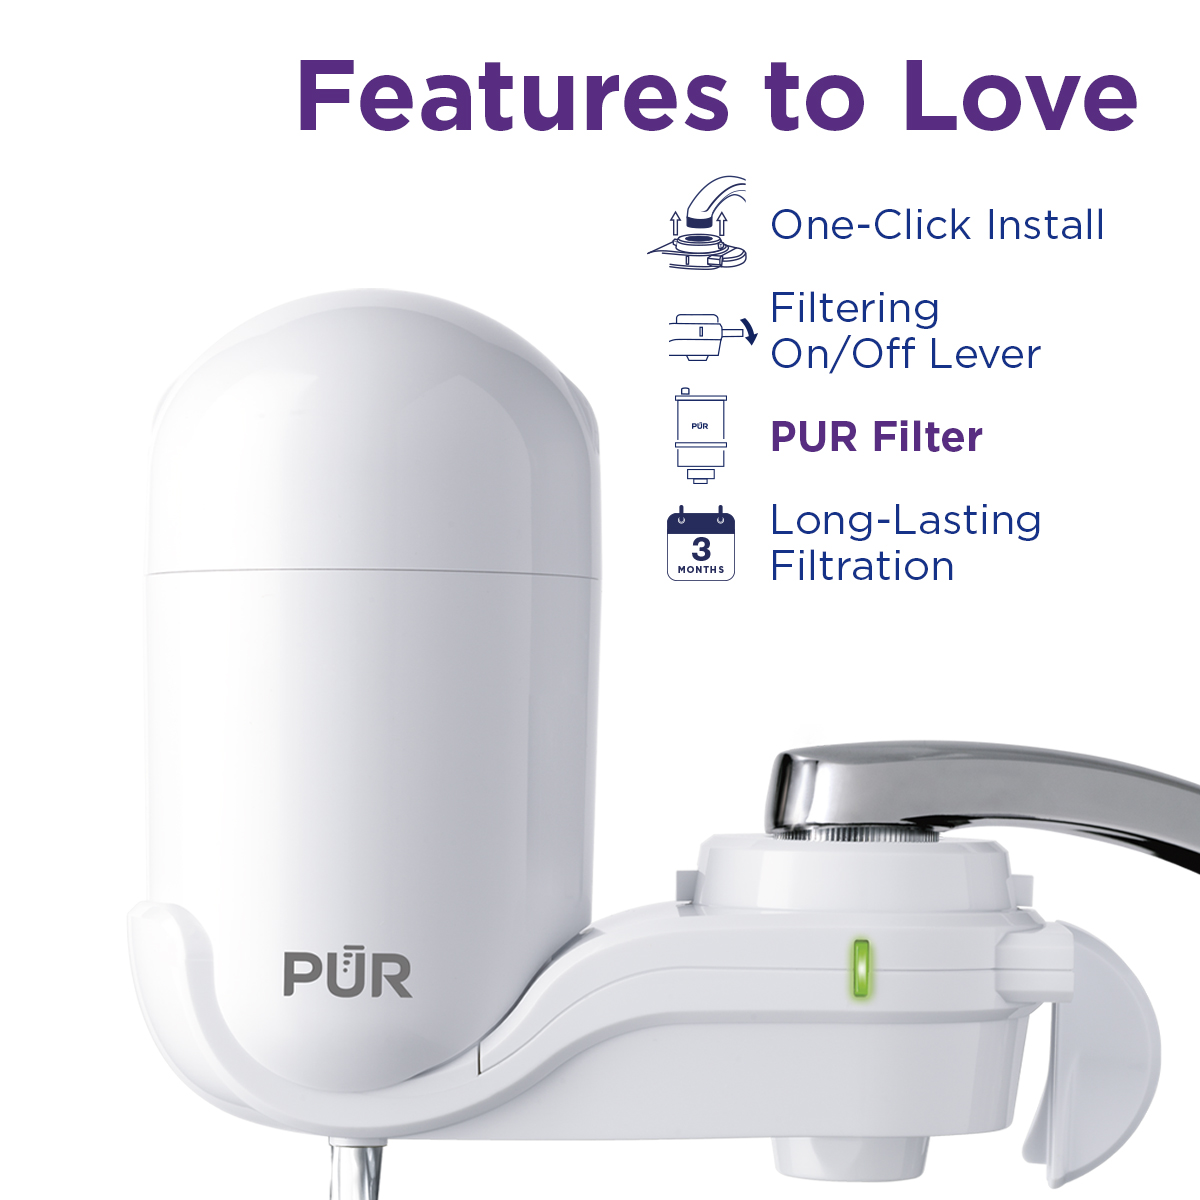 PUR Faucet Mount Water Filtration System, Vertical, White, FM3333B - image 4 of 10